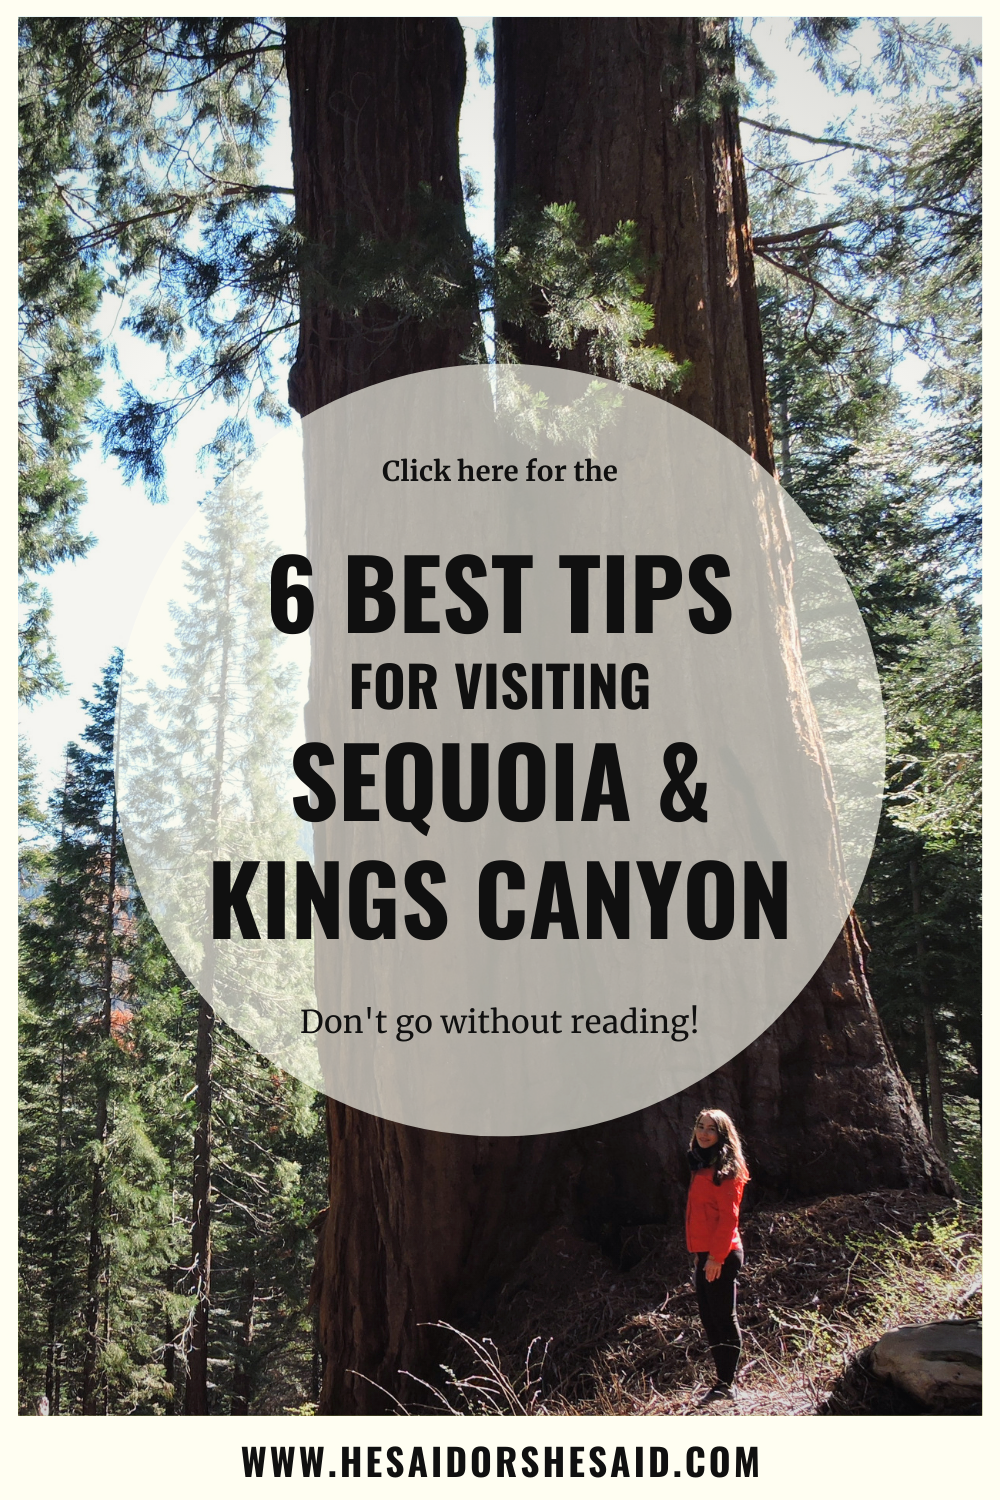 6 Best Tips for visiting Sequoia and Kings Canyon